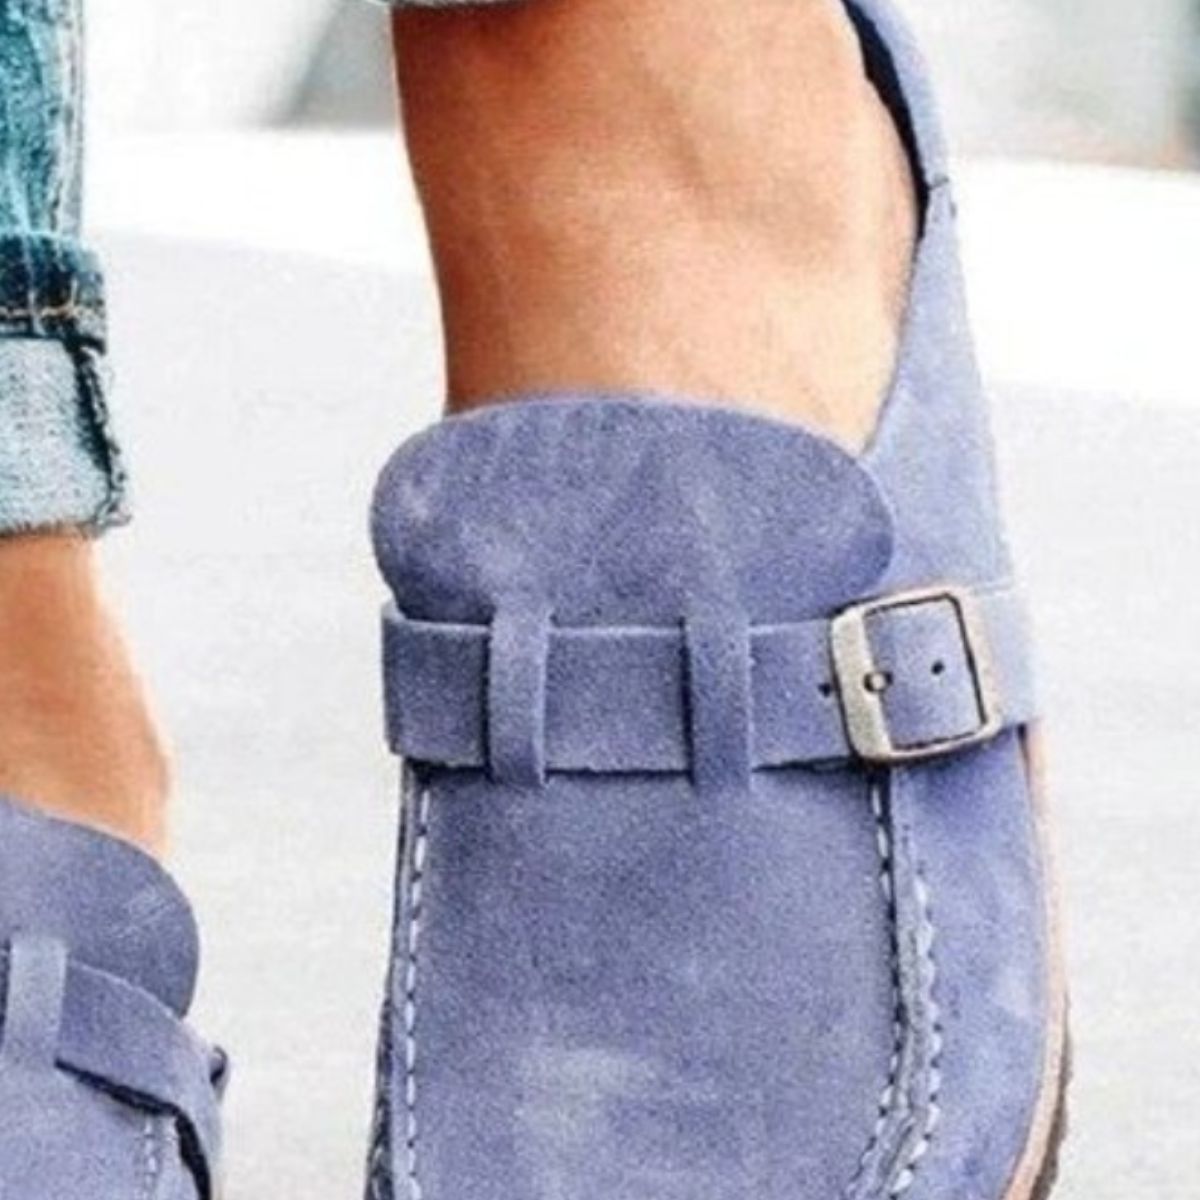 Round Toe Low Heel Buckle Loafers